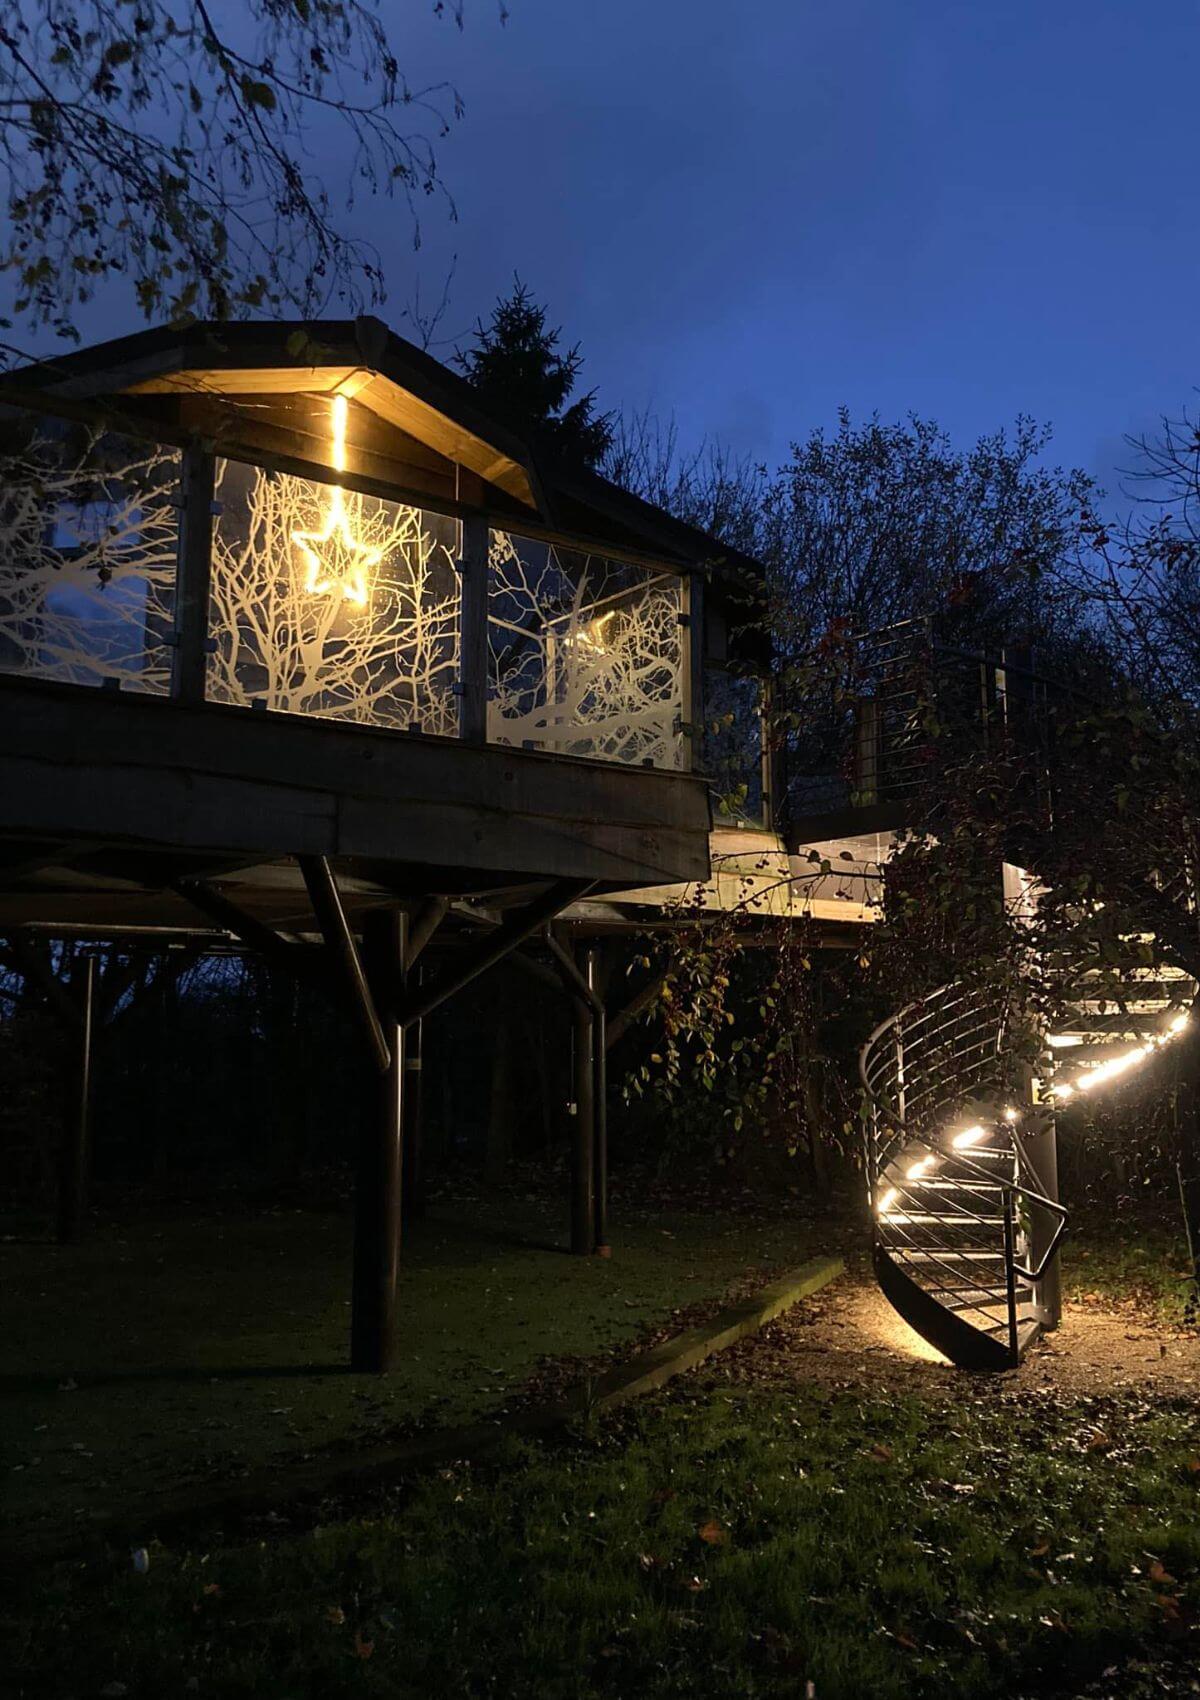 Wolds Edge Treehouse in Bishop Wilton is one of the most unusual places to stay in Yorkshire